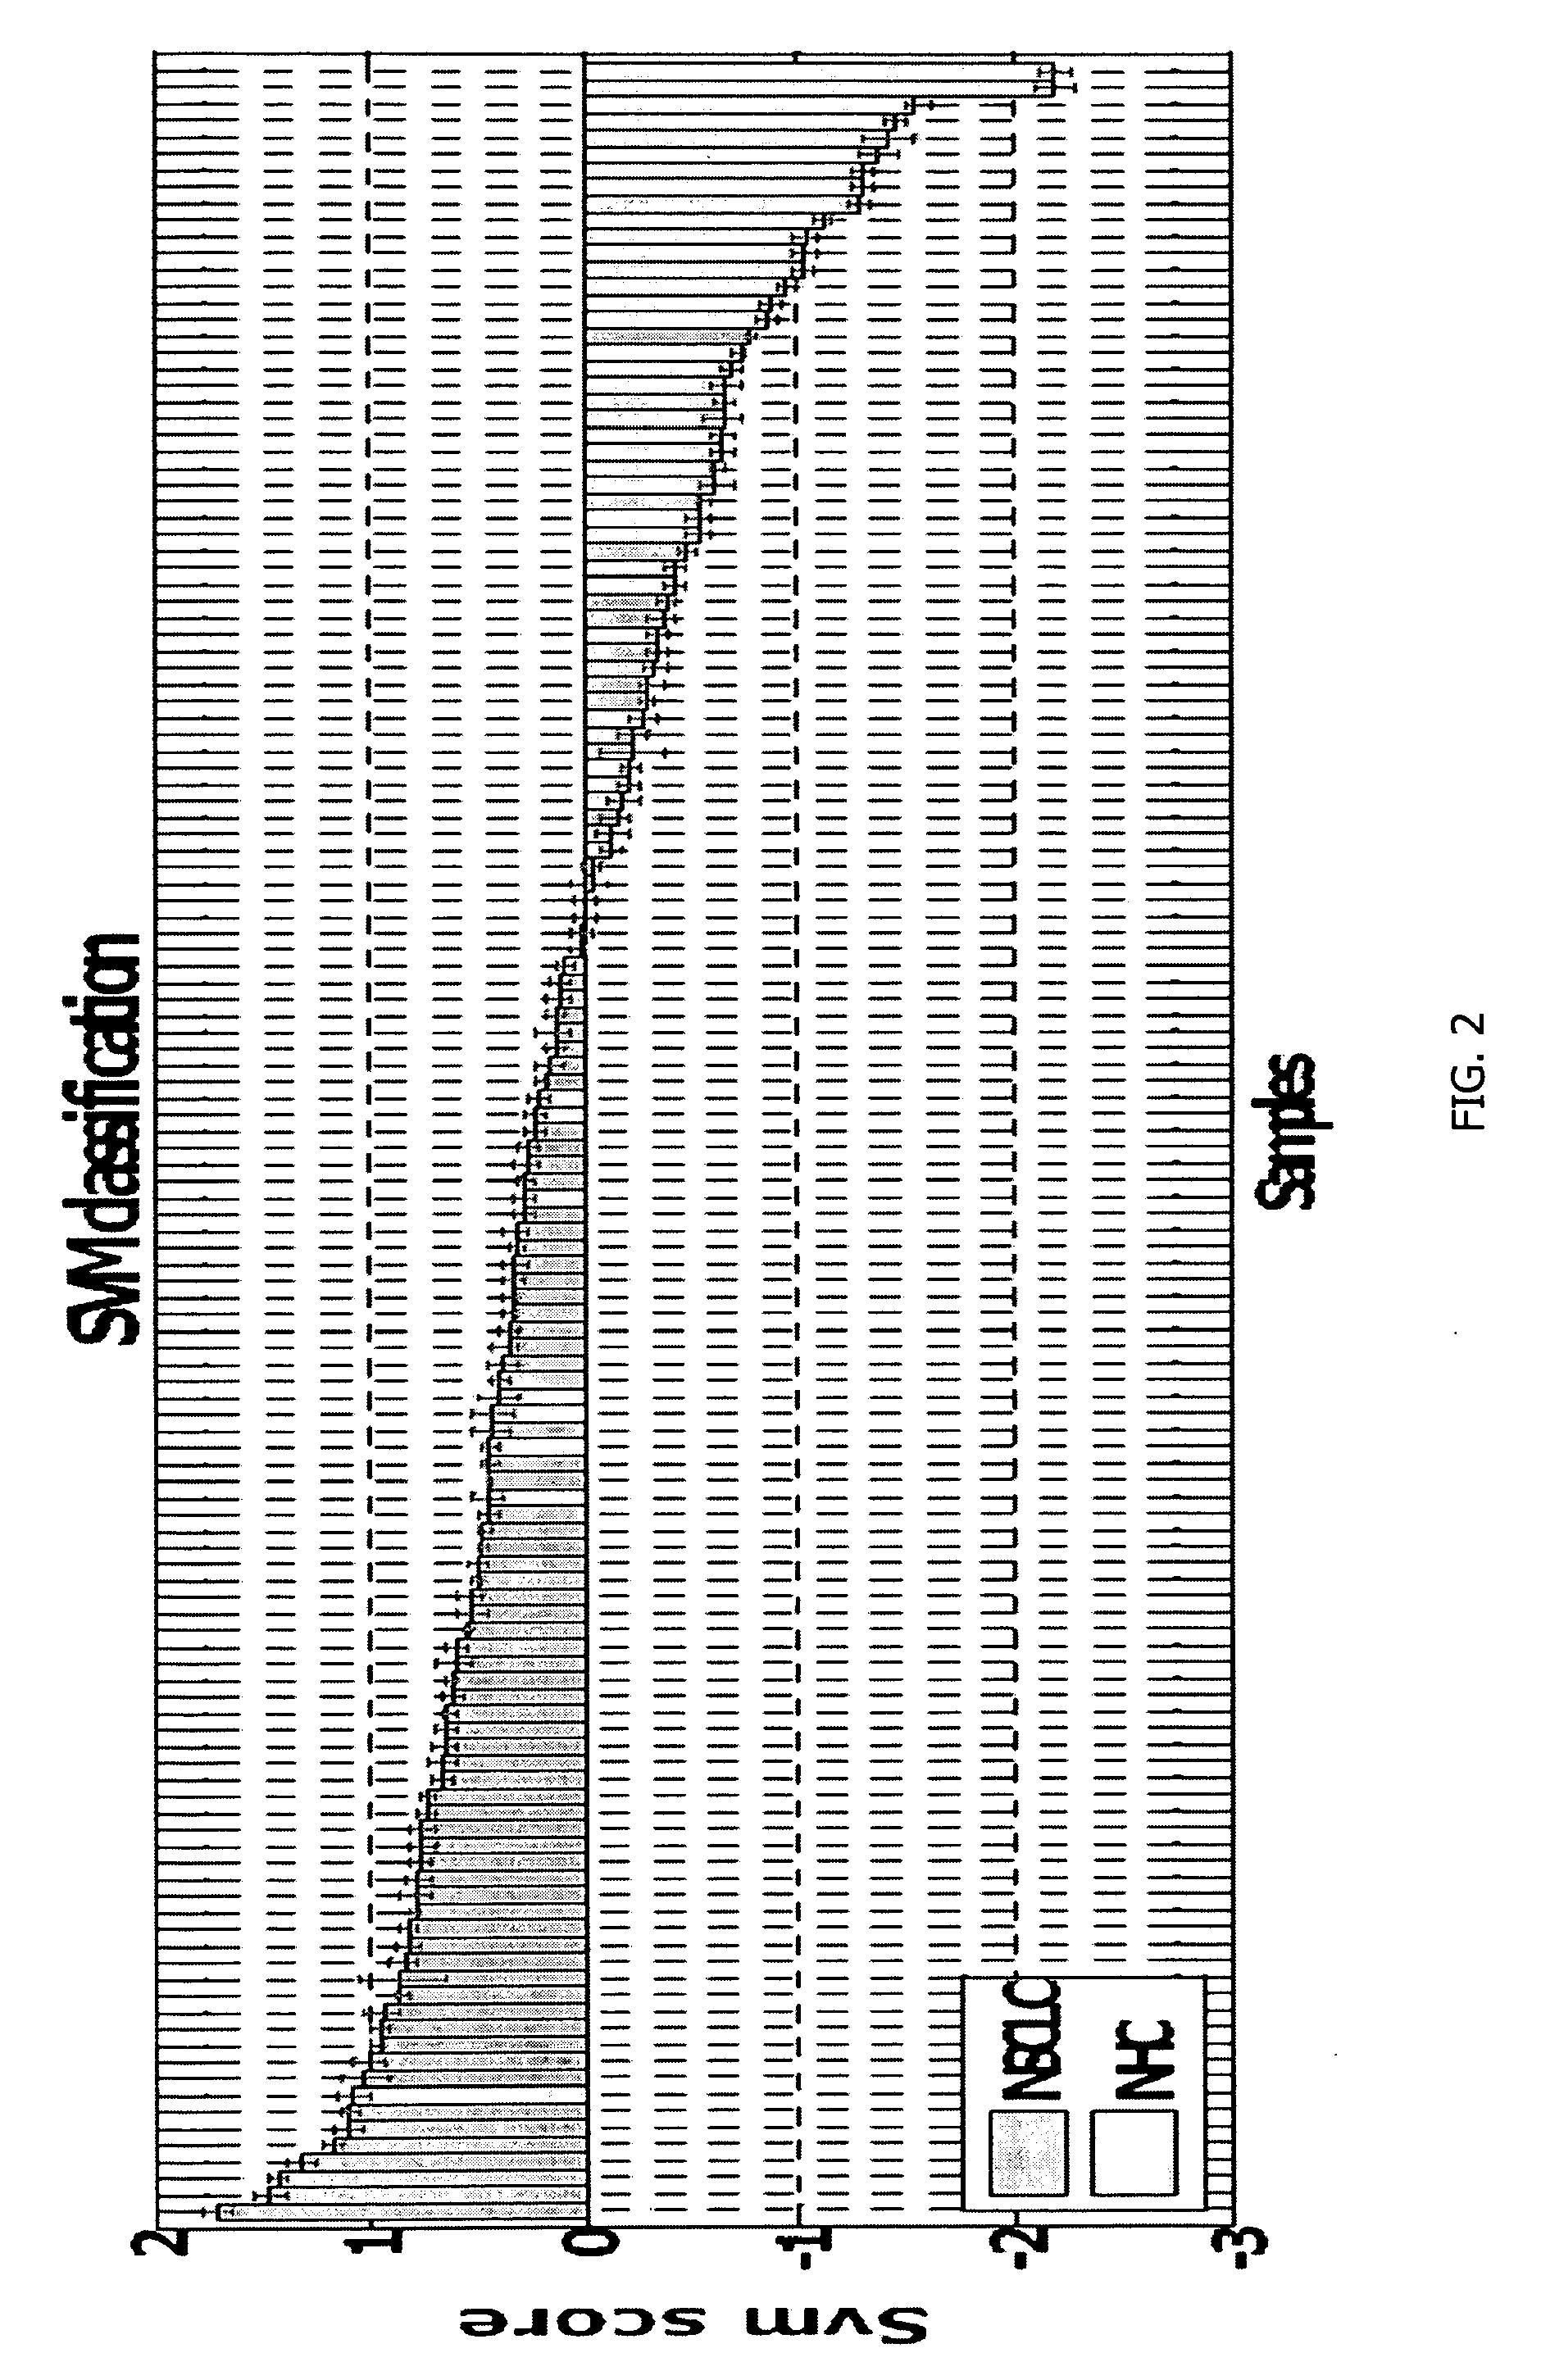 Method for diagnosing lung cancers using gene expression profiles in peripheral blood mononuclear cells